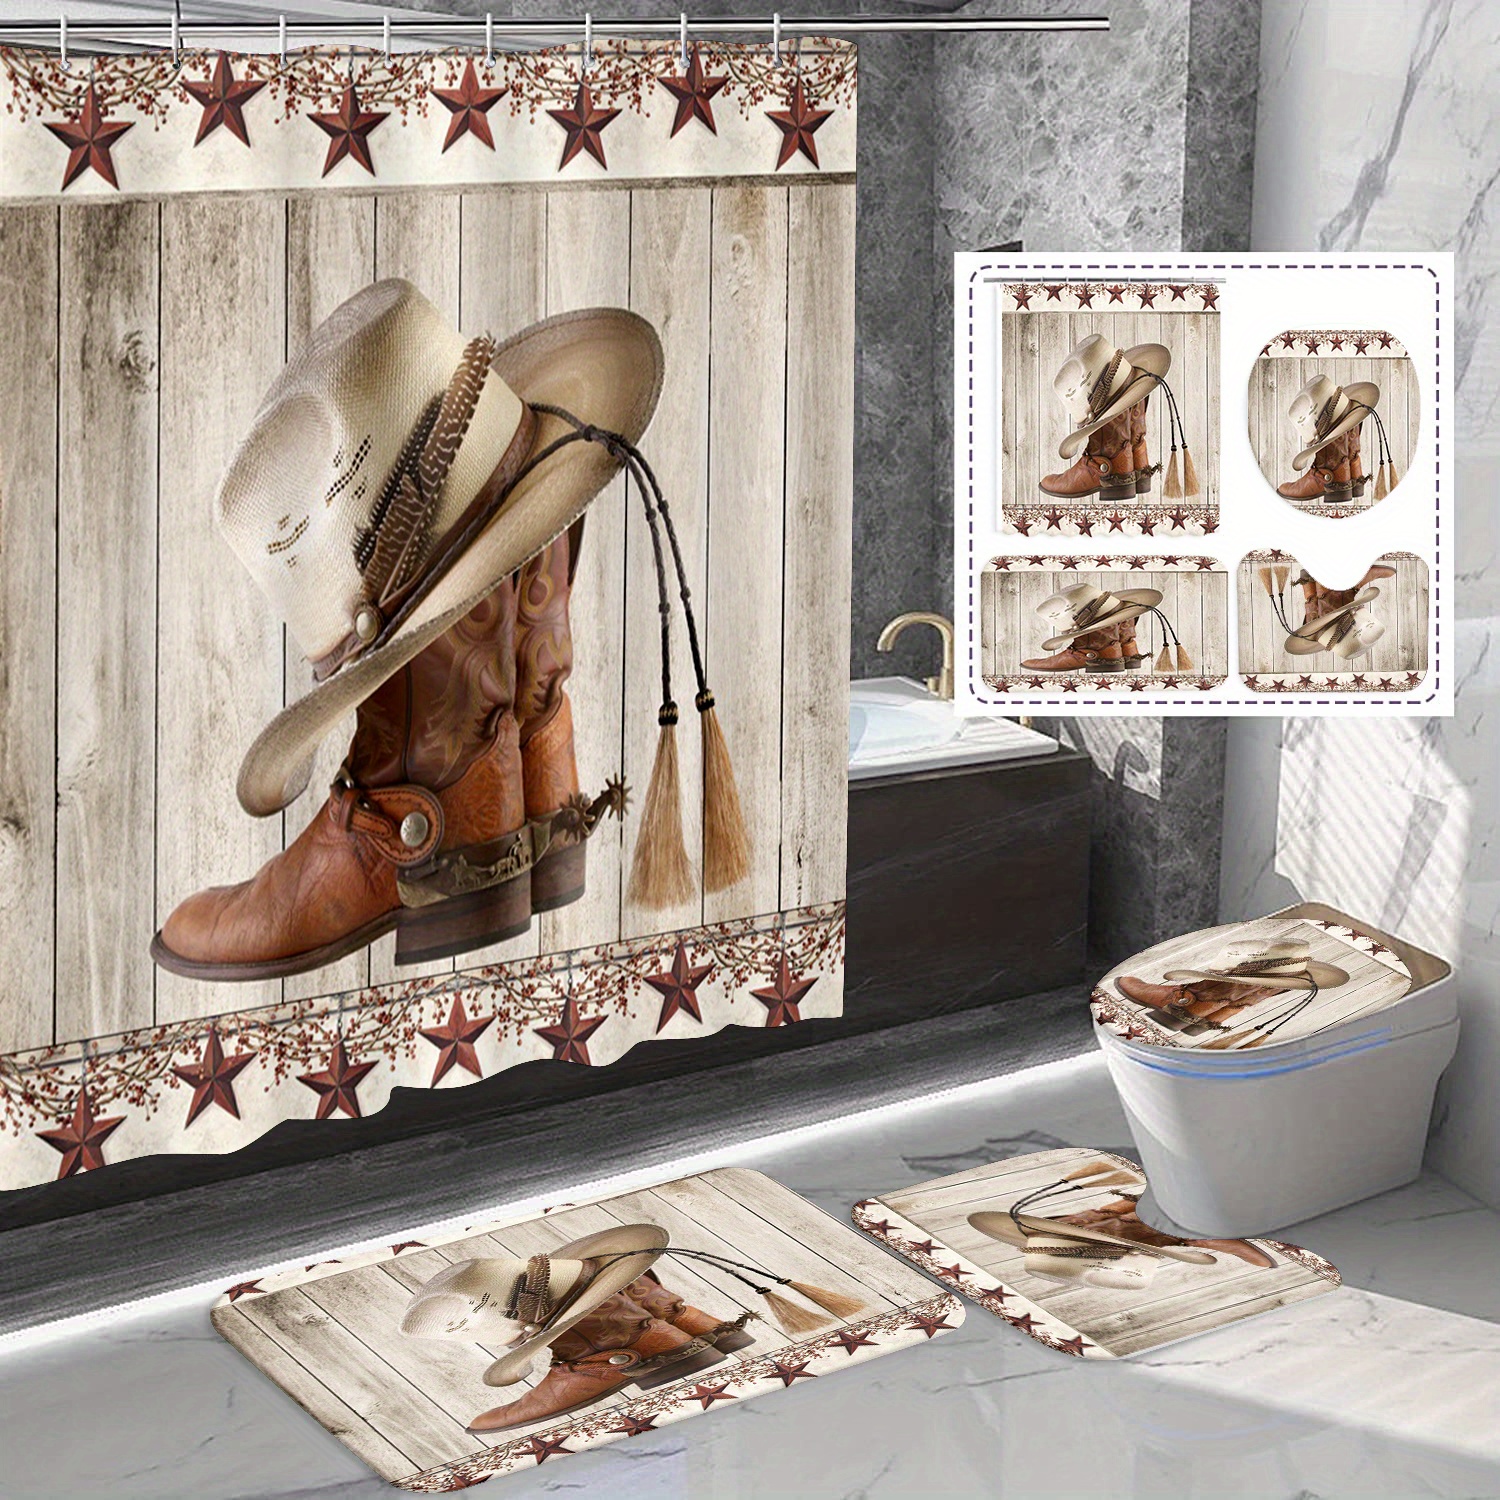 

Western Texas Curtain Set - 1/4 Pcs, Includes Waterproof Polyester Curtain, Bath Mat, U-shaped Rug, And Toilet Lid Cover With Horseshoe & Cowboy Boot Accents, Machine Washable